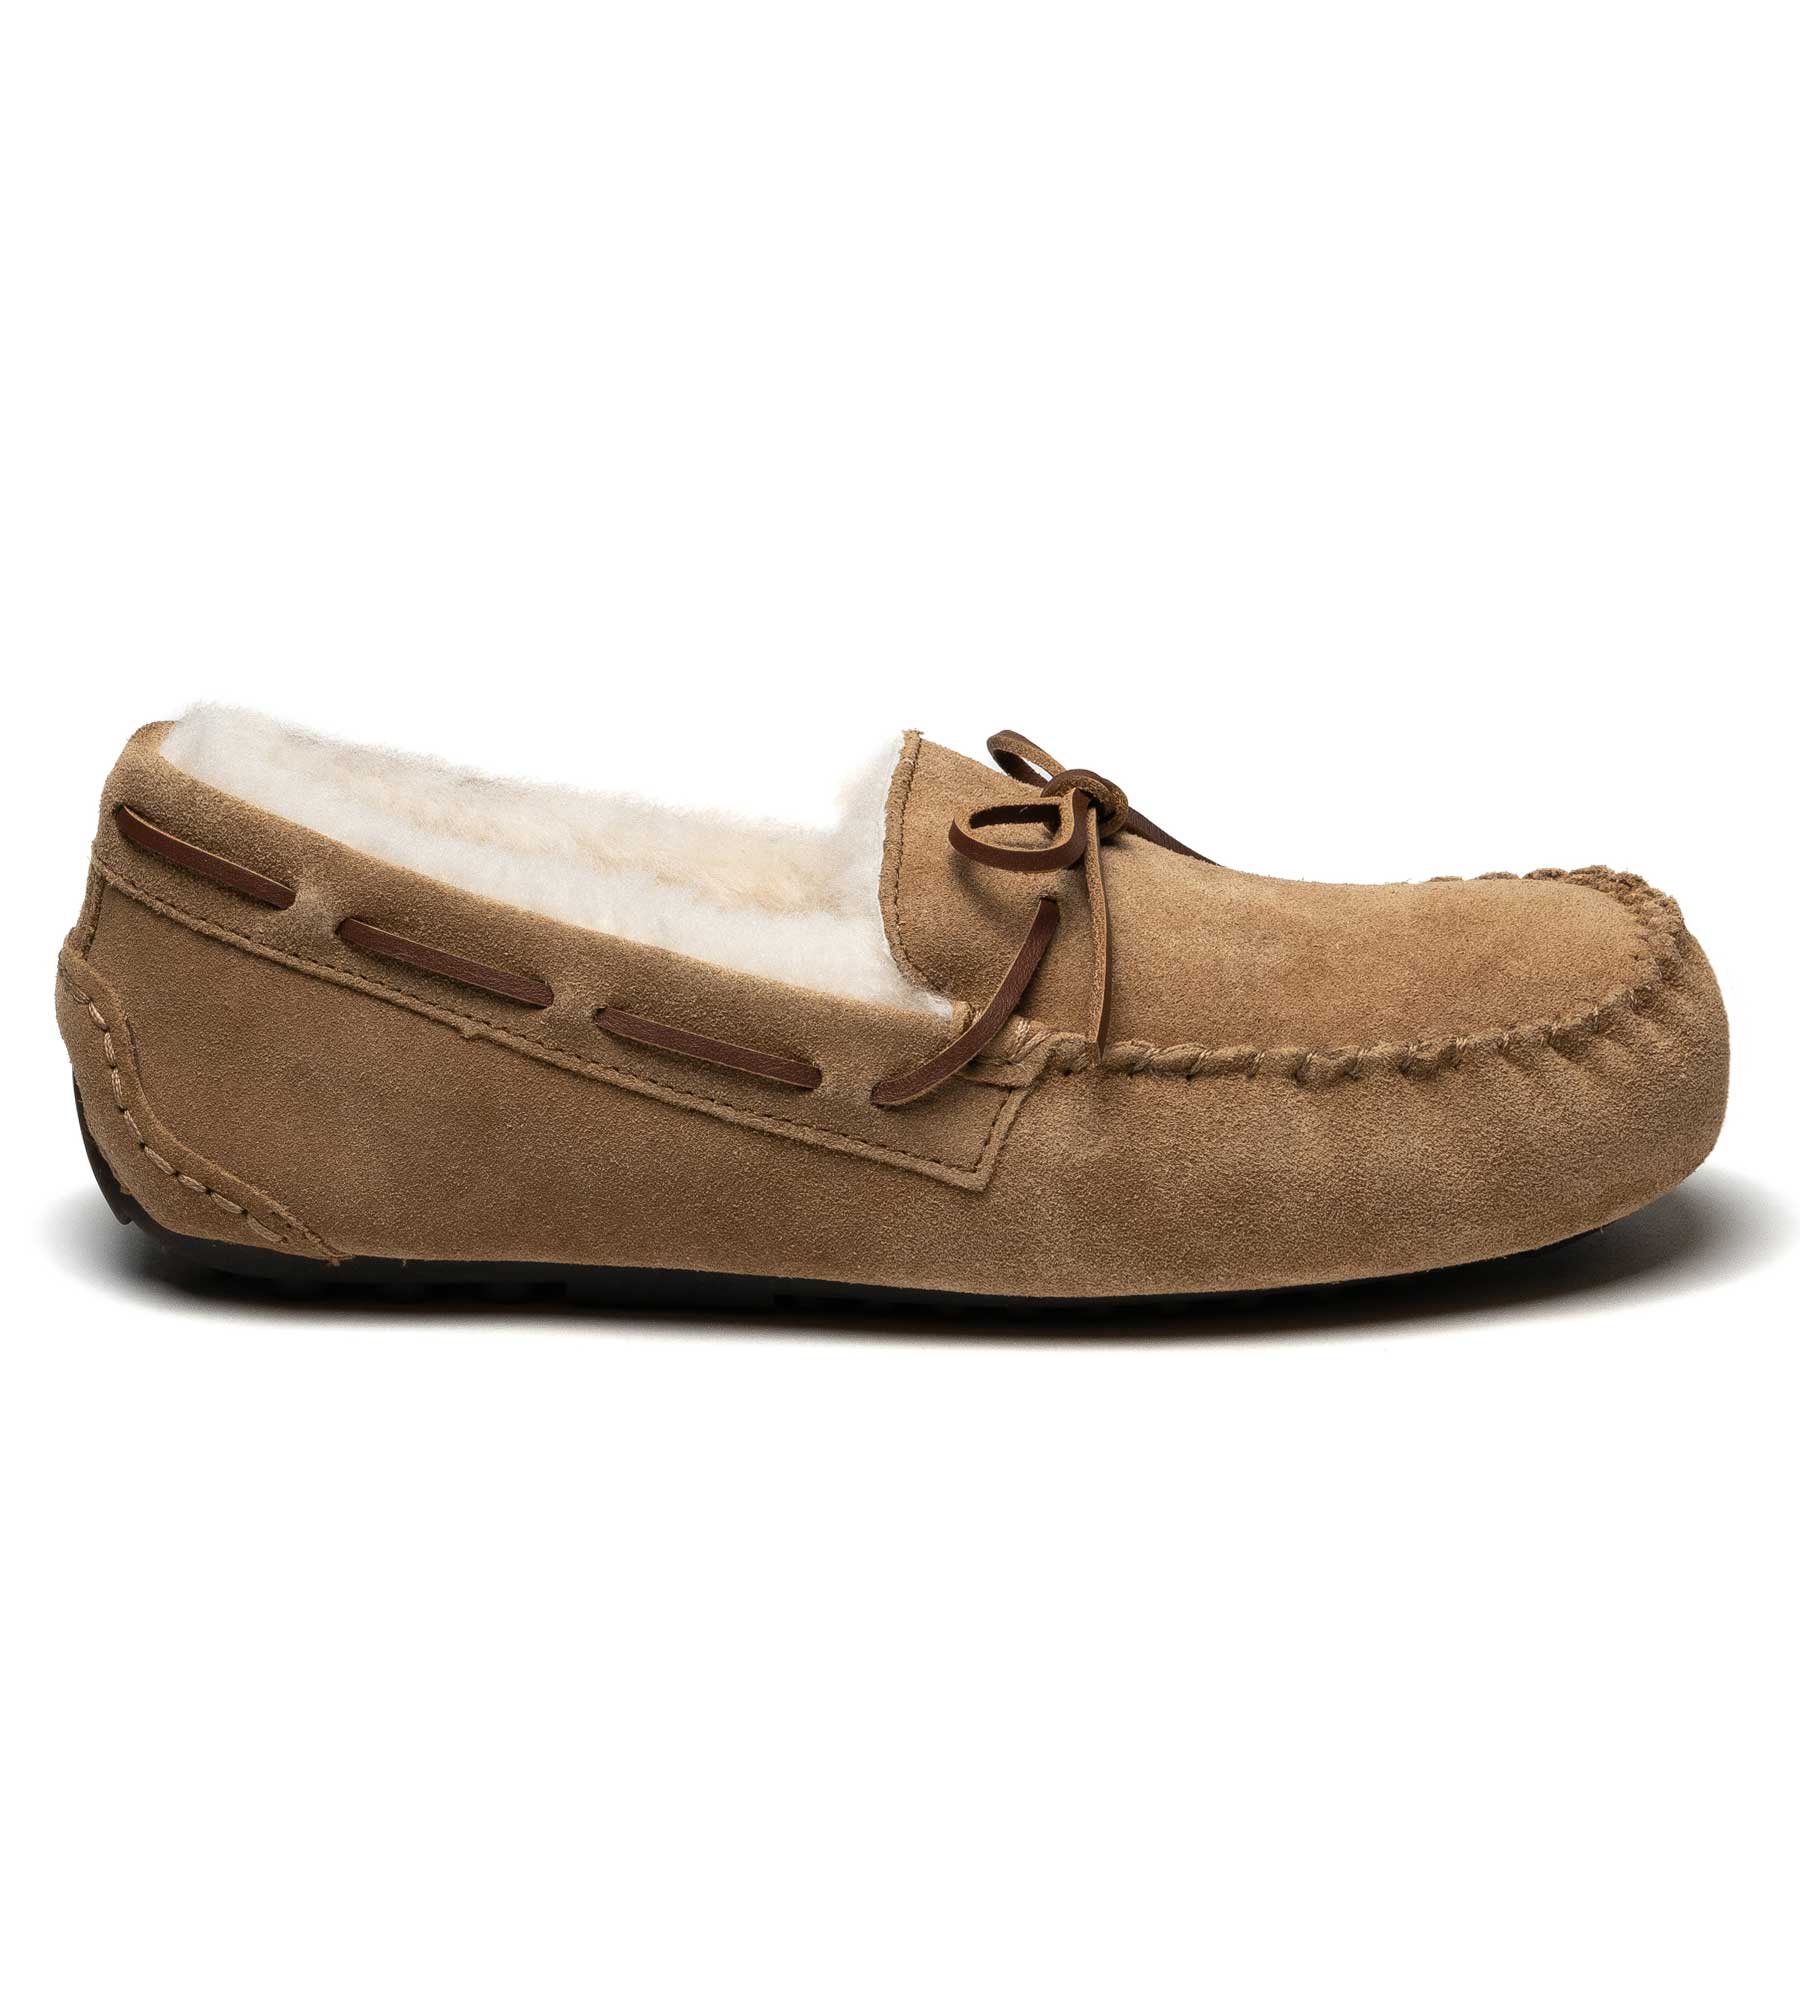 Women's Classic Suede Sheepskin Moccasin Slippers Mustard : Ladies Moccasins